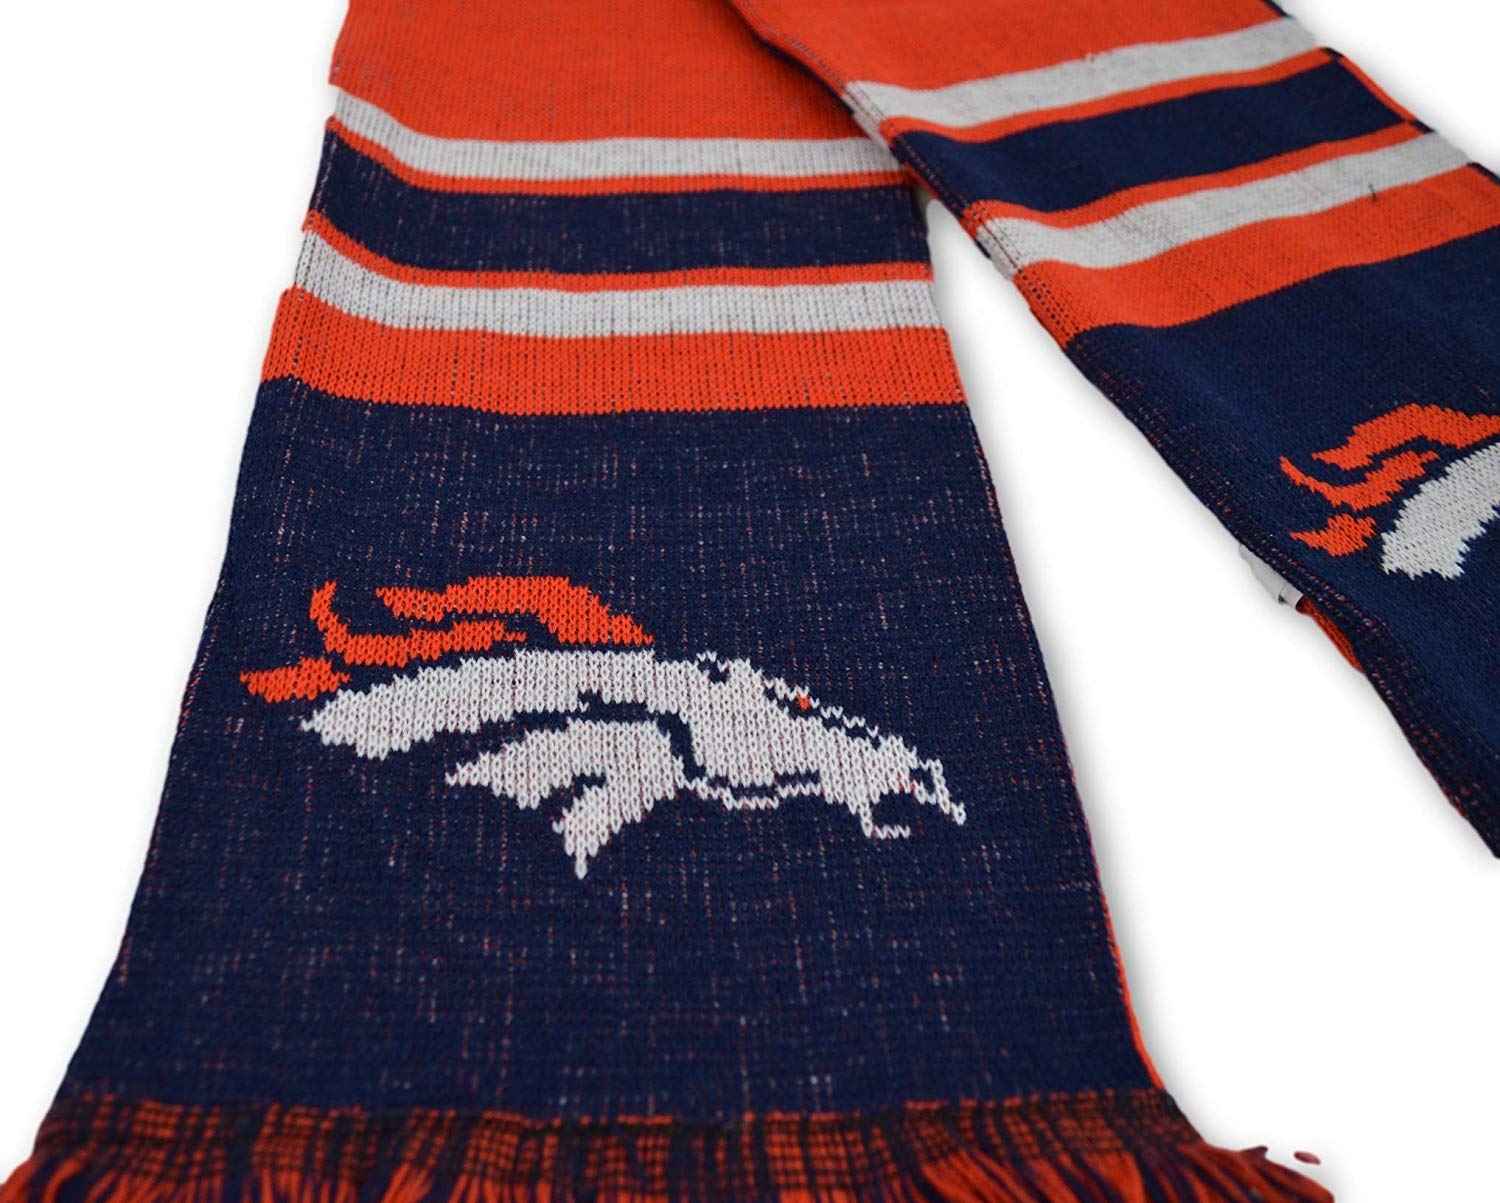 NFL Fan Shop Authentic Football Team Logo Reversible Team Scarf. Show Team Pride Everywhere you go in Style. Rather at Home, Work or at the Game these Scarves Are Perfect